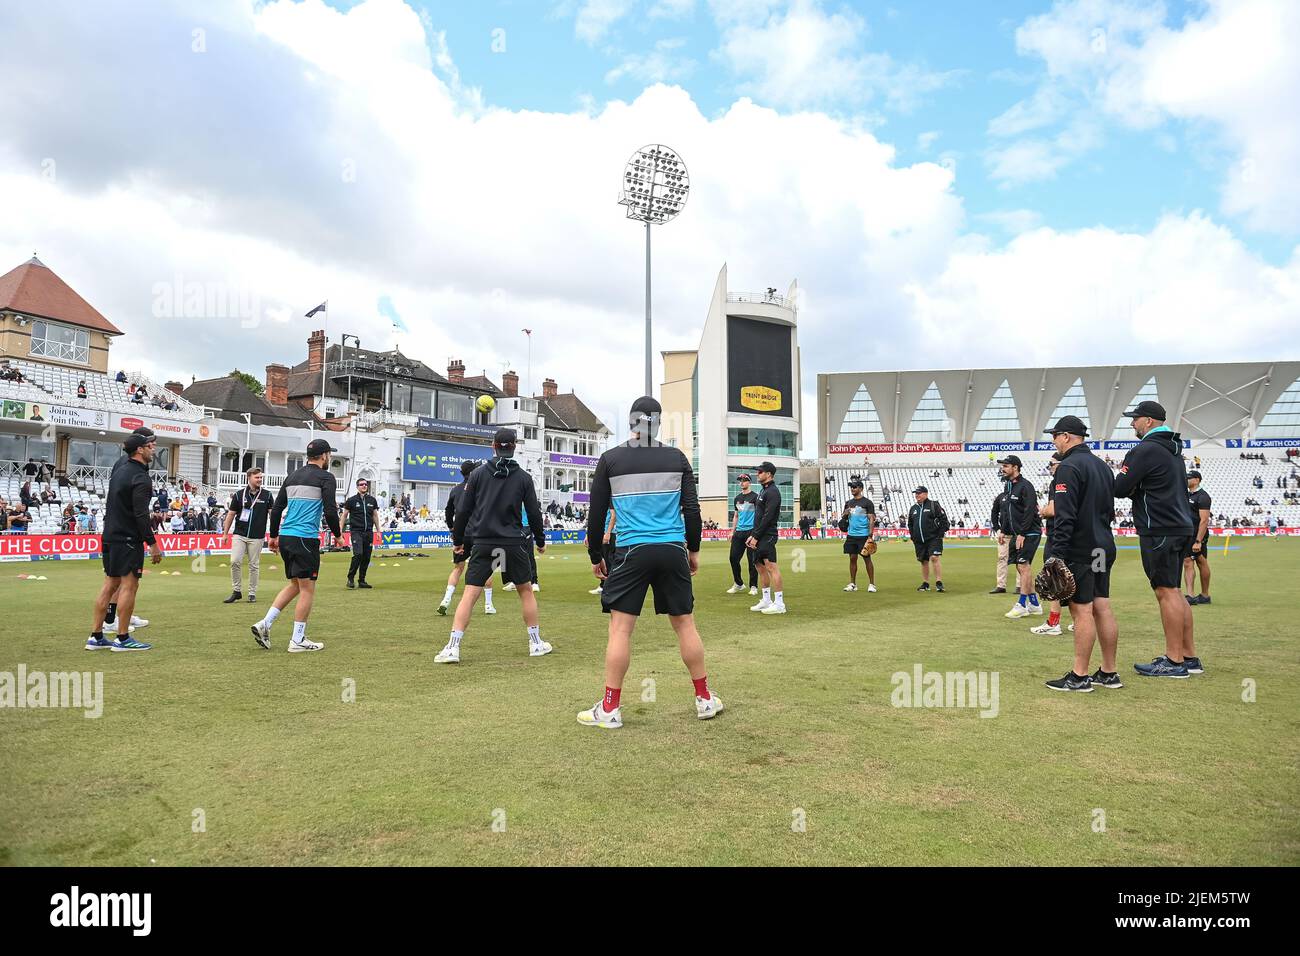 New Zeland players warming up during day 2 of the 2nd Test between the New Zealand Blackcaps and England at Trent Bridge Cricket Ground, Nottingham, England on Saturday 11 June 2022. Stock Photo